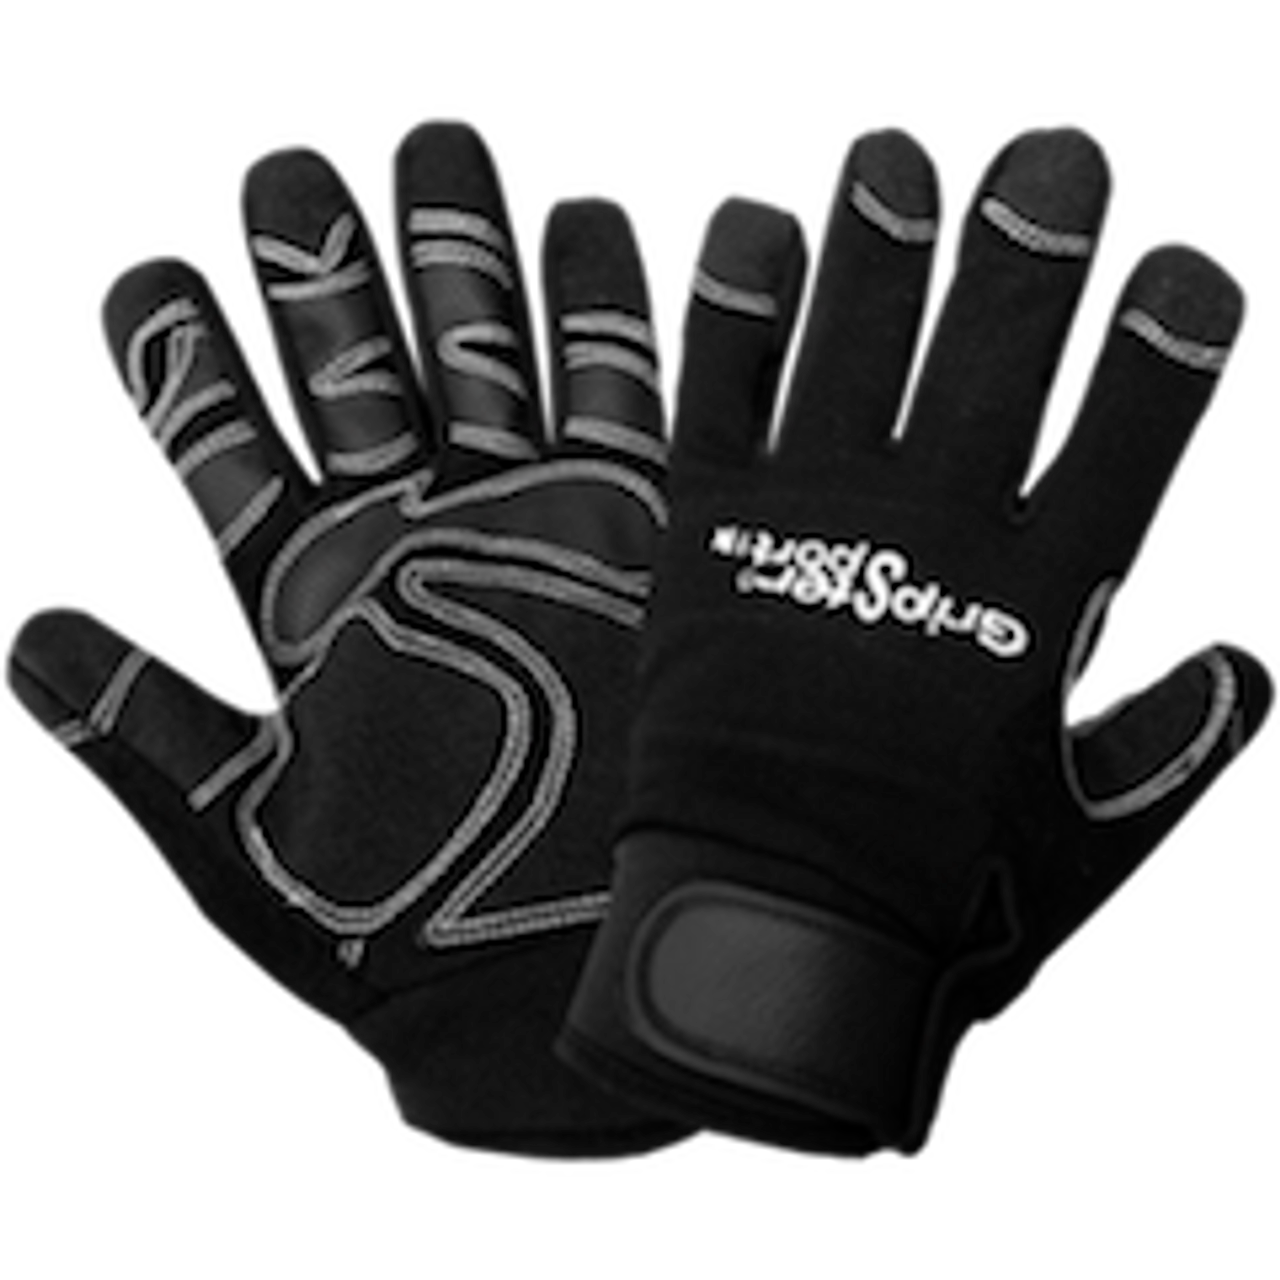 https://cdn11.bigcommerce.com/s-sdy0vdzitk/images/stencil/1280x1280/products/141/454/performance-insulated-gloves__99250.1599976935.png?c=1